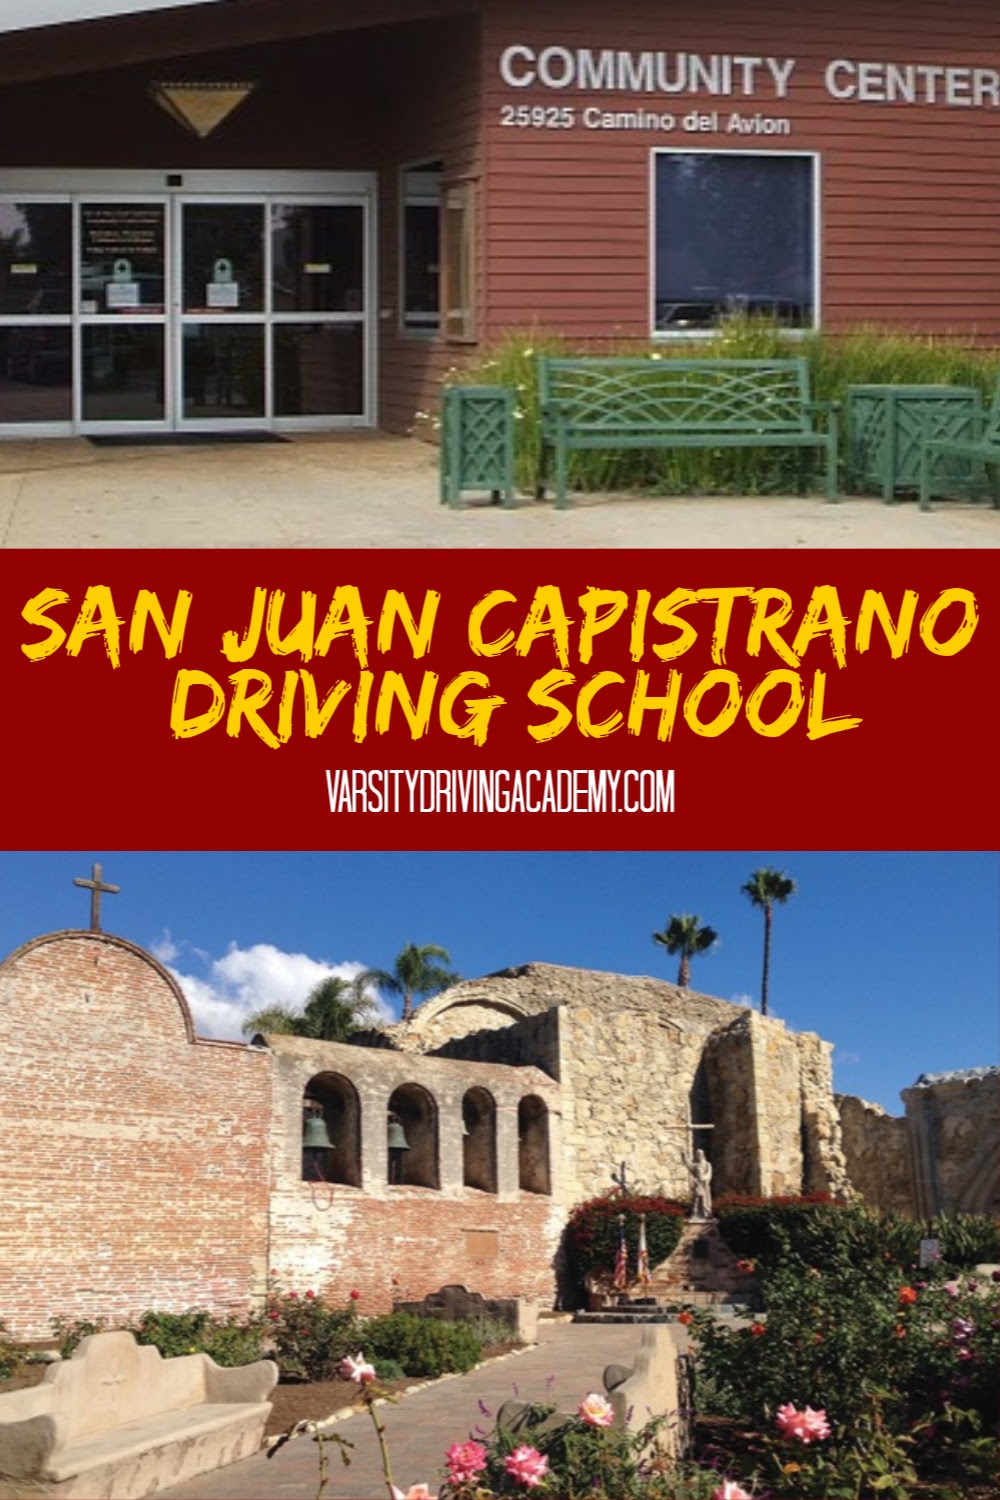 You can register for the best San Juan Capistrano driving school right now at Varsity Driving Academy and get the best drivers ed in San Juan Capistrano.